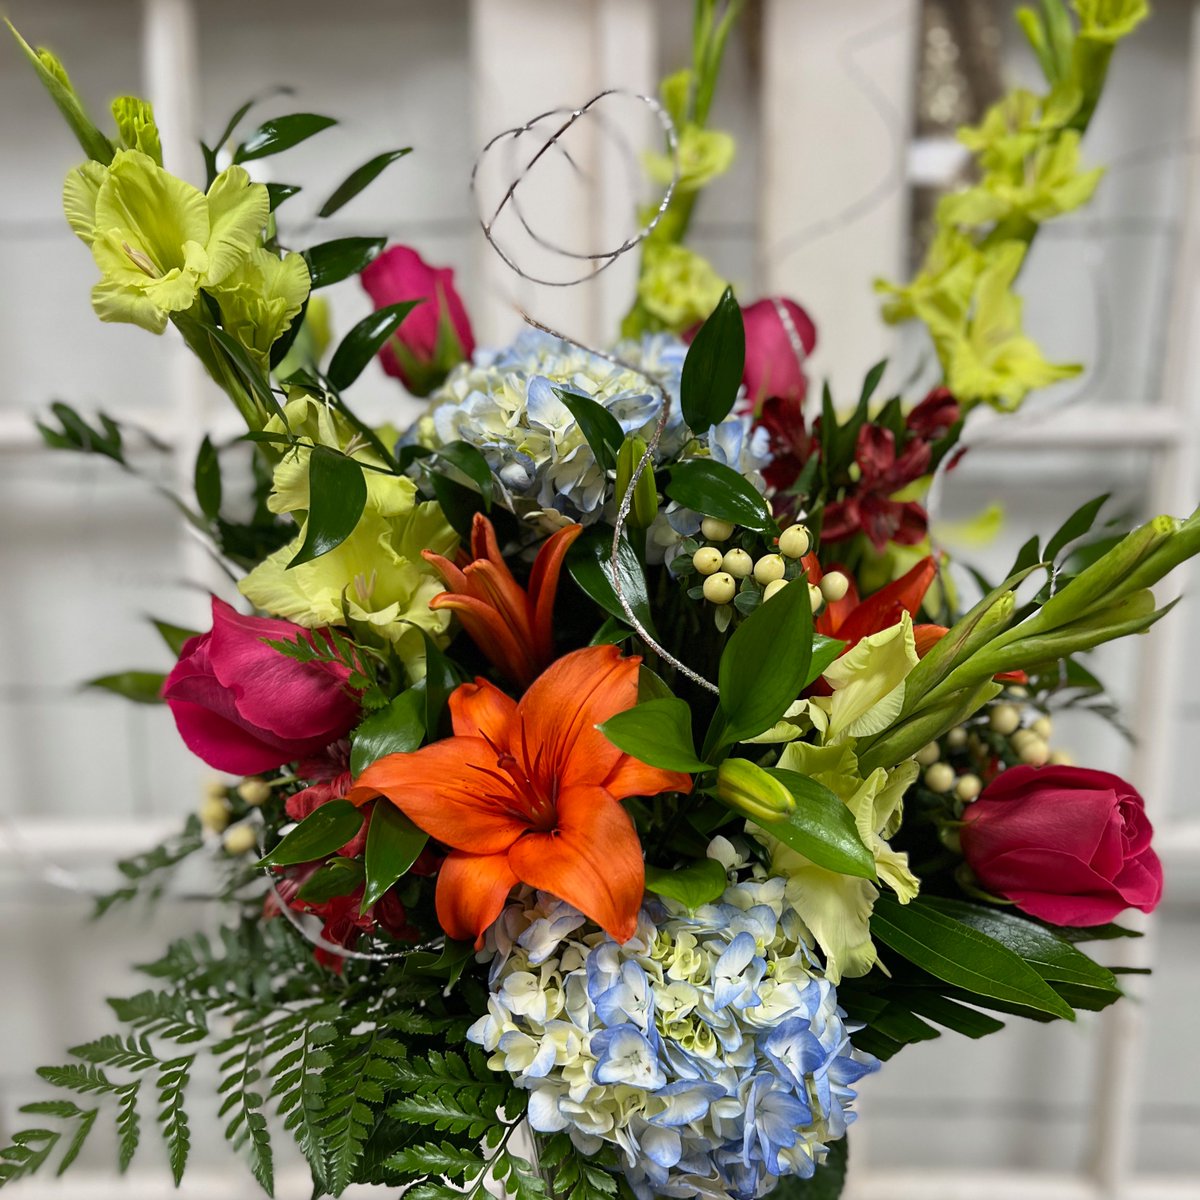 We hope your Monday is starting off as beautiful as this arrangement 🤩

#dallasflorist